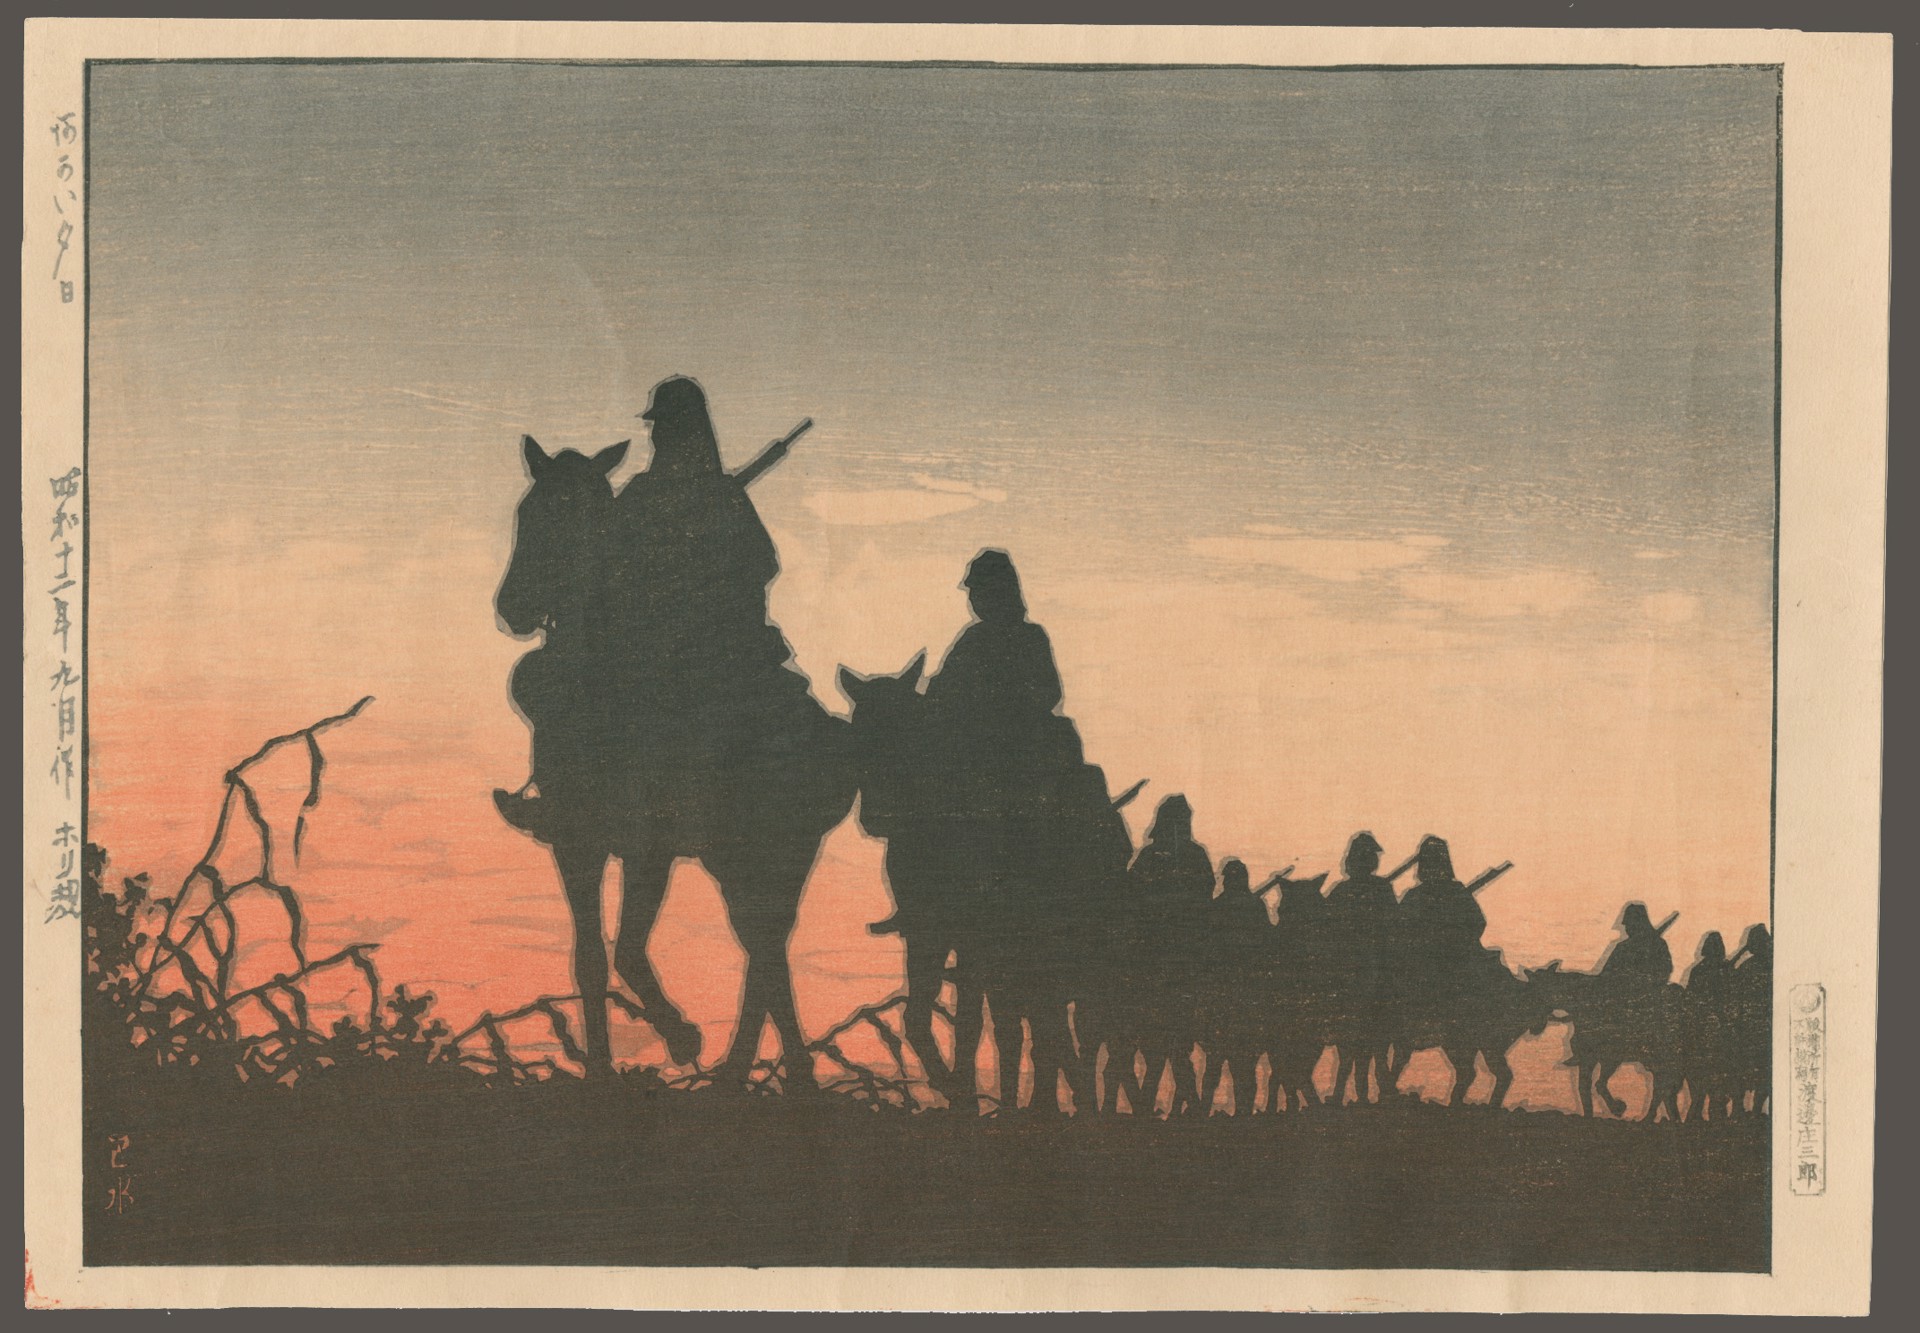 Sunset - Advance of the Calvary in Manchuria by Hasui